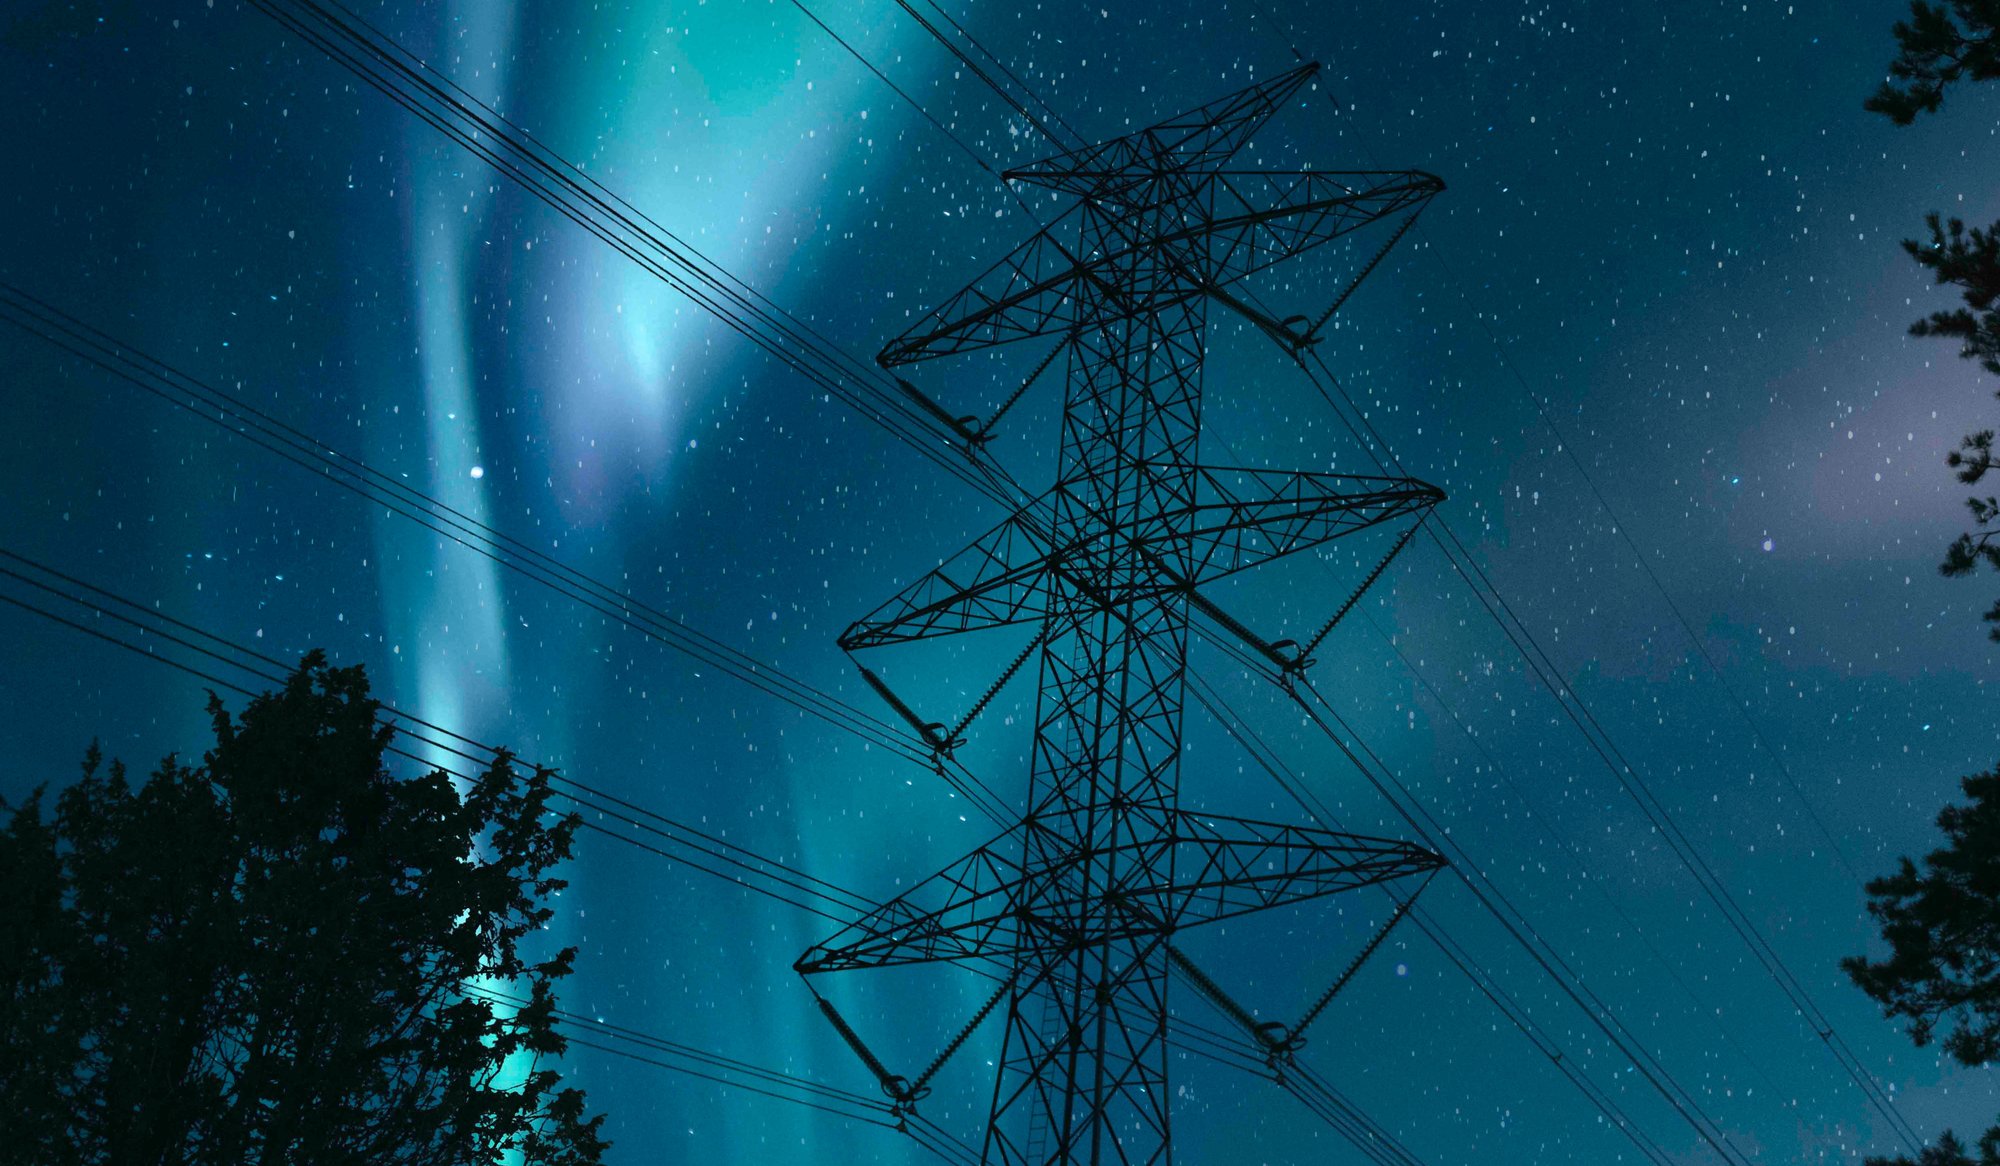 Photo of power lines in a forrest in the night, with northern lights on the sky